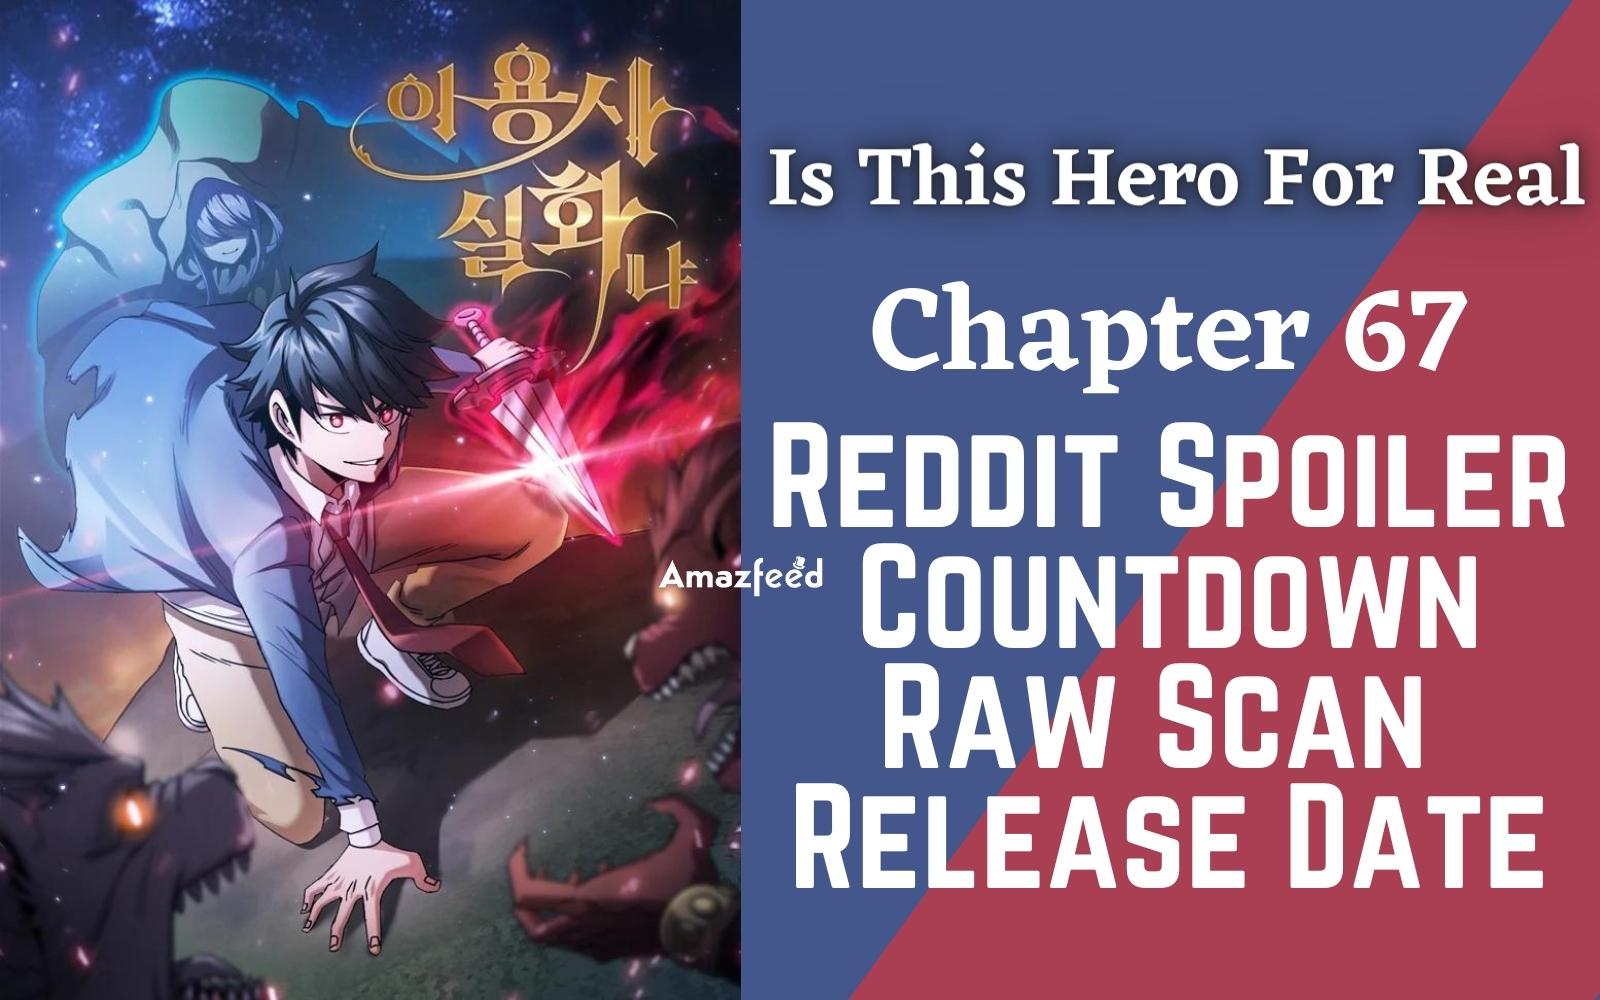 Is This Hero For Real 67 Is This Hero For Real Chapter 67 Spoiler, Raw Scan, Release Date, Count  Down » Amazfeed